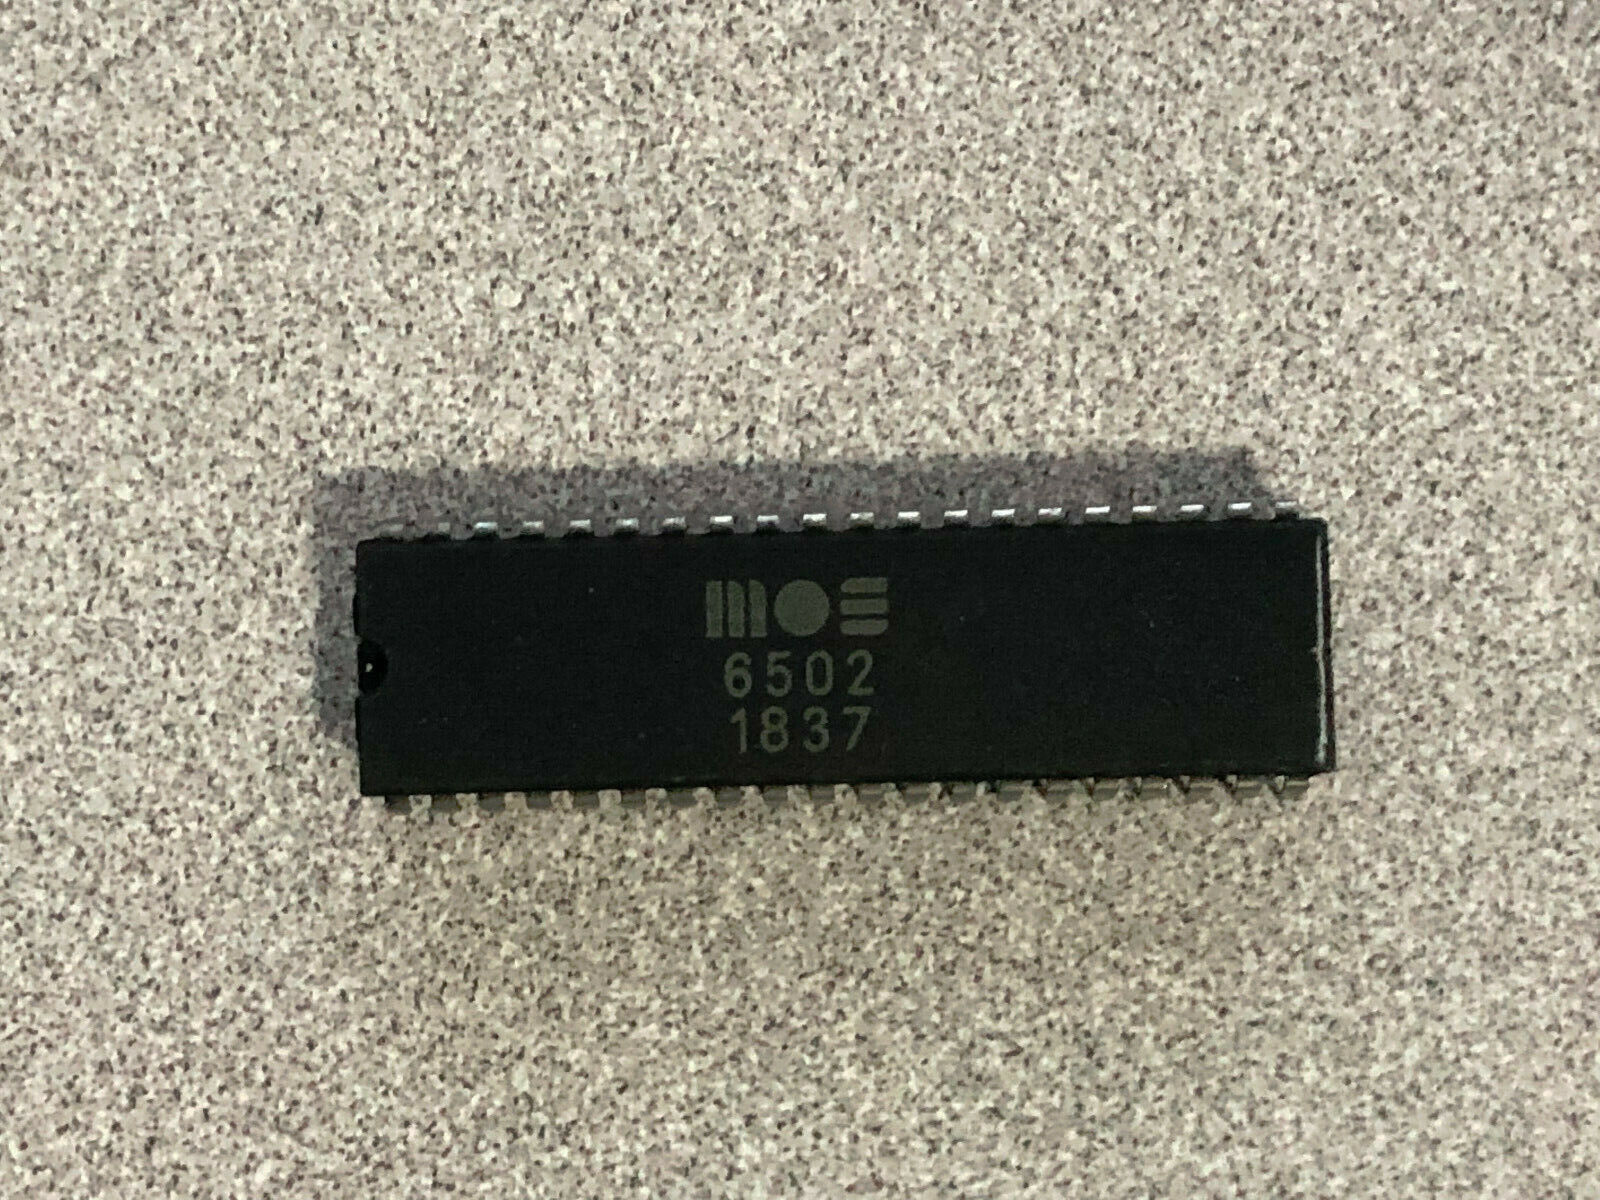 MOS Stamped 6502 CPU Chip Microprocessor for Commodore Floppy ViC 20 Apple II 